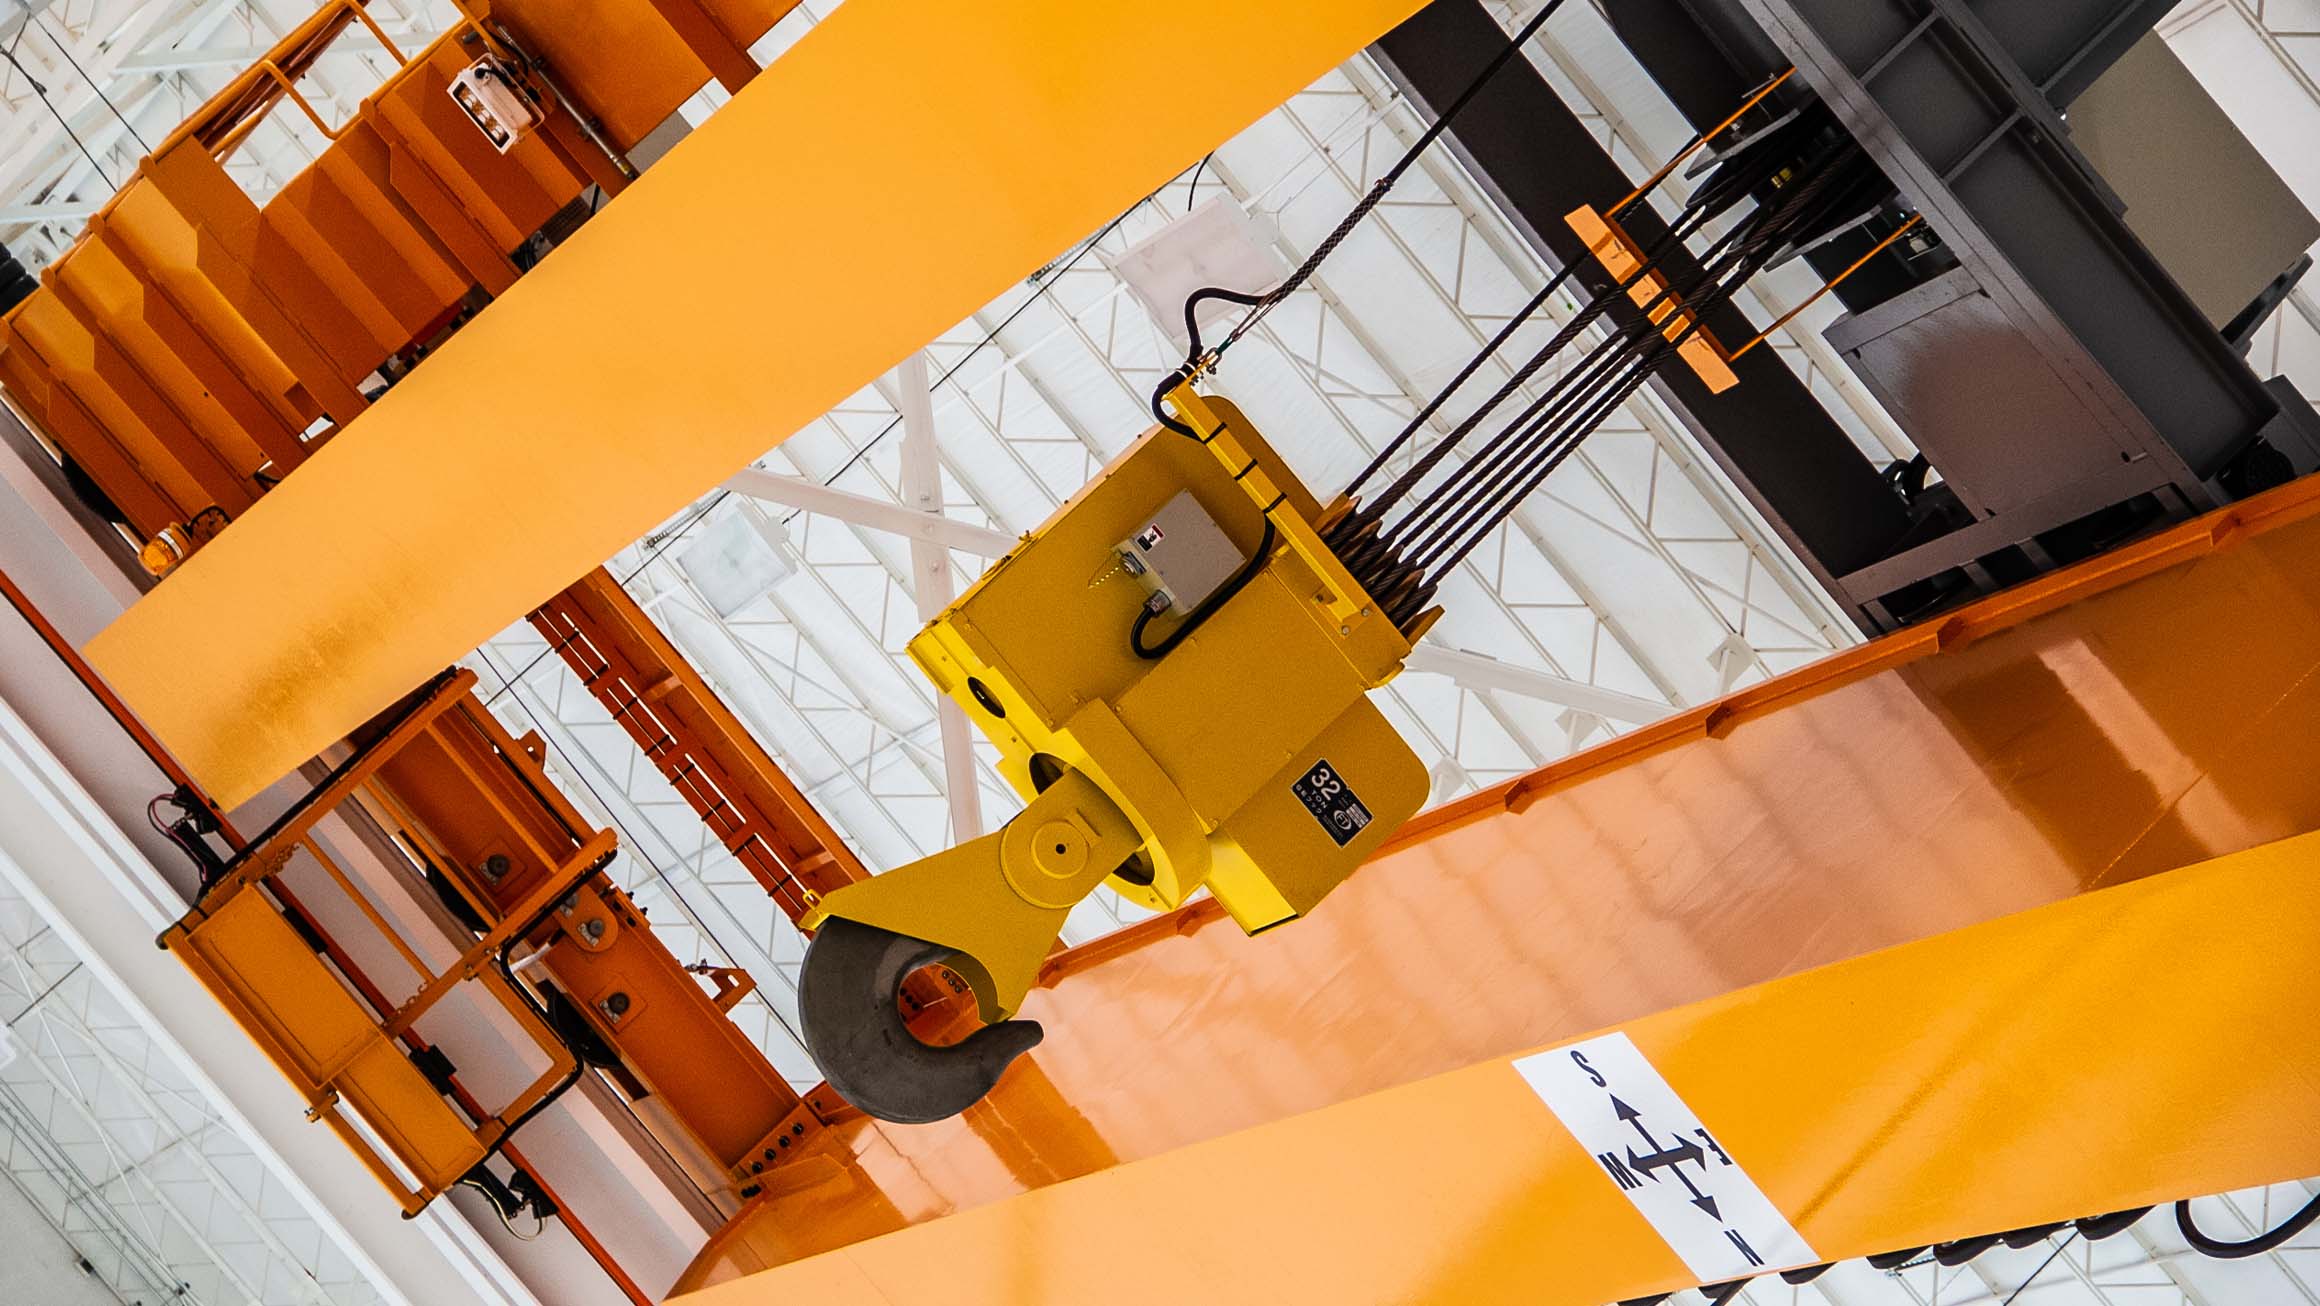 Photograph of a yellow overhead industrial crane located inside an industrial park building for DAVISA